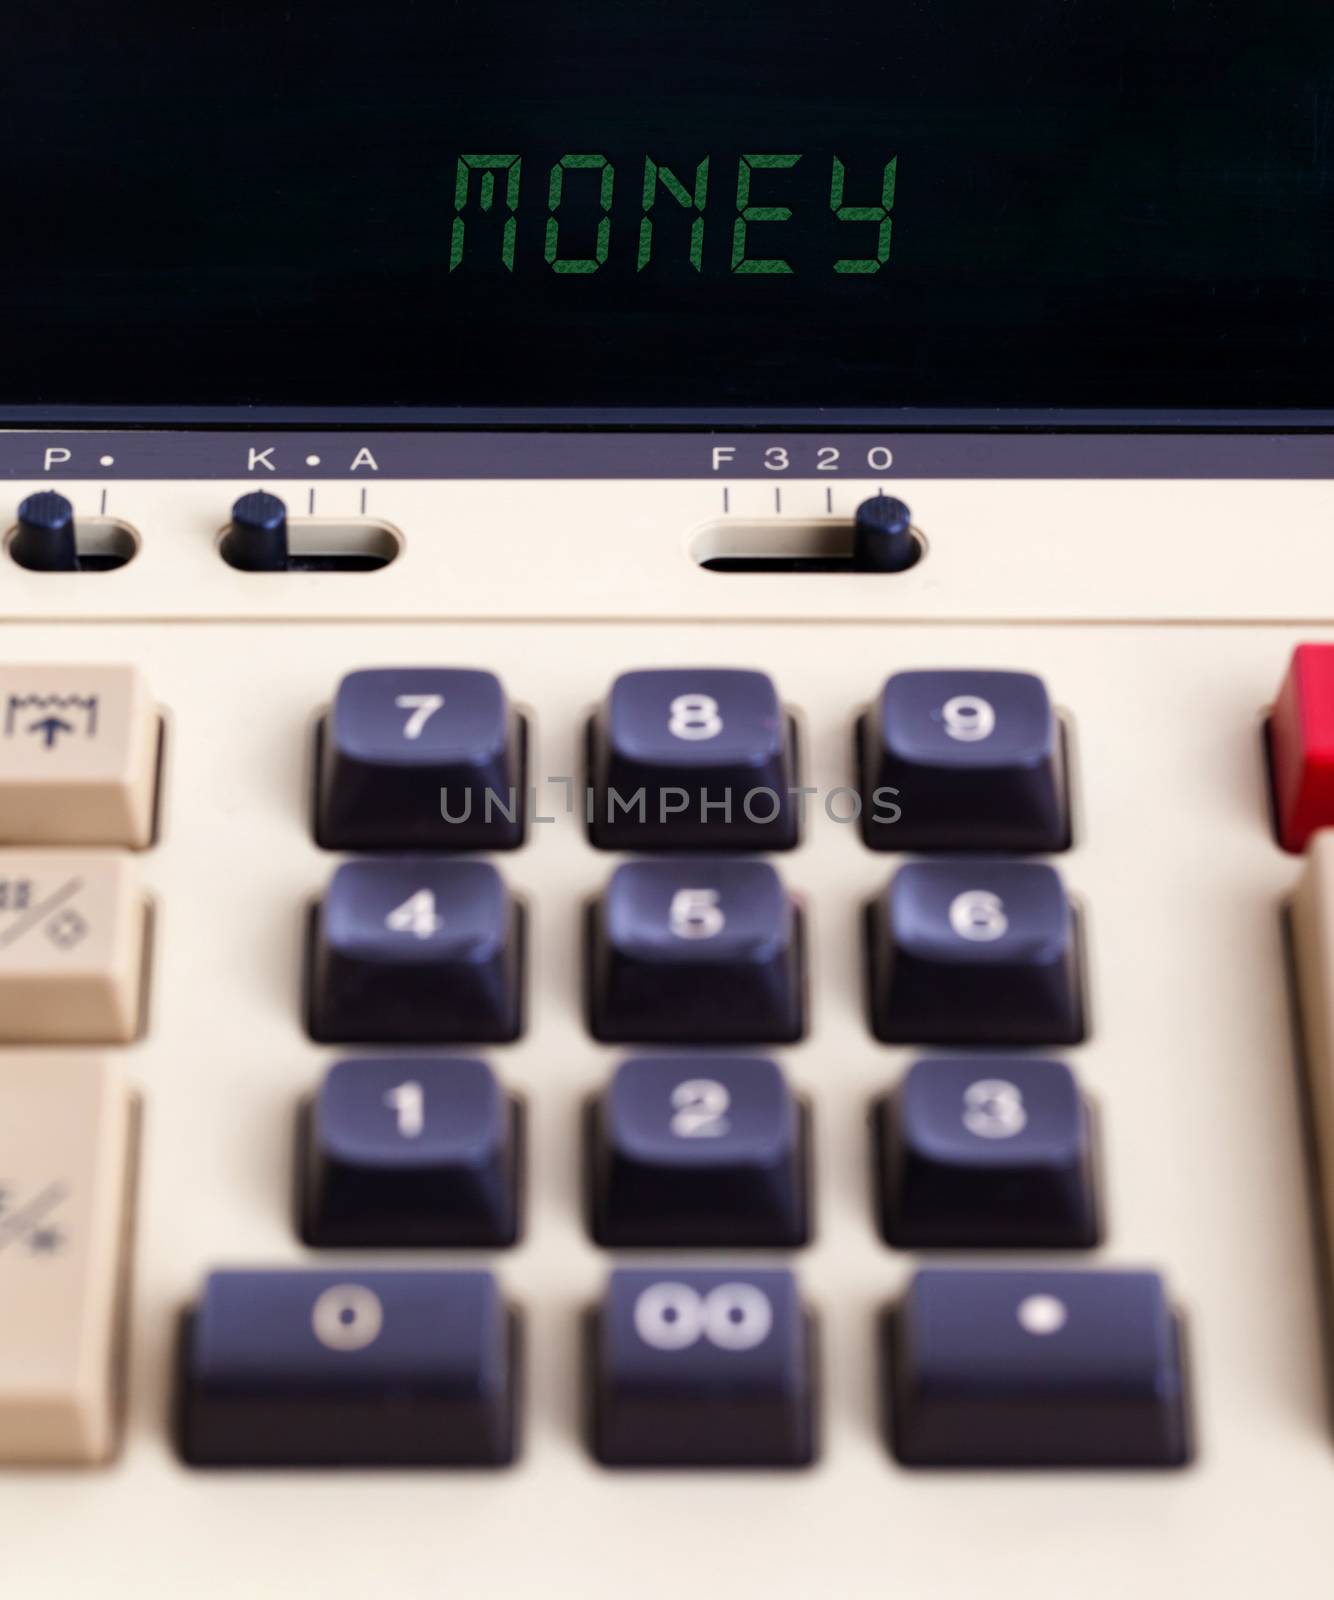 Old calculator showing a text on display - money